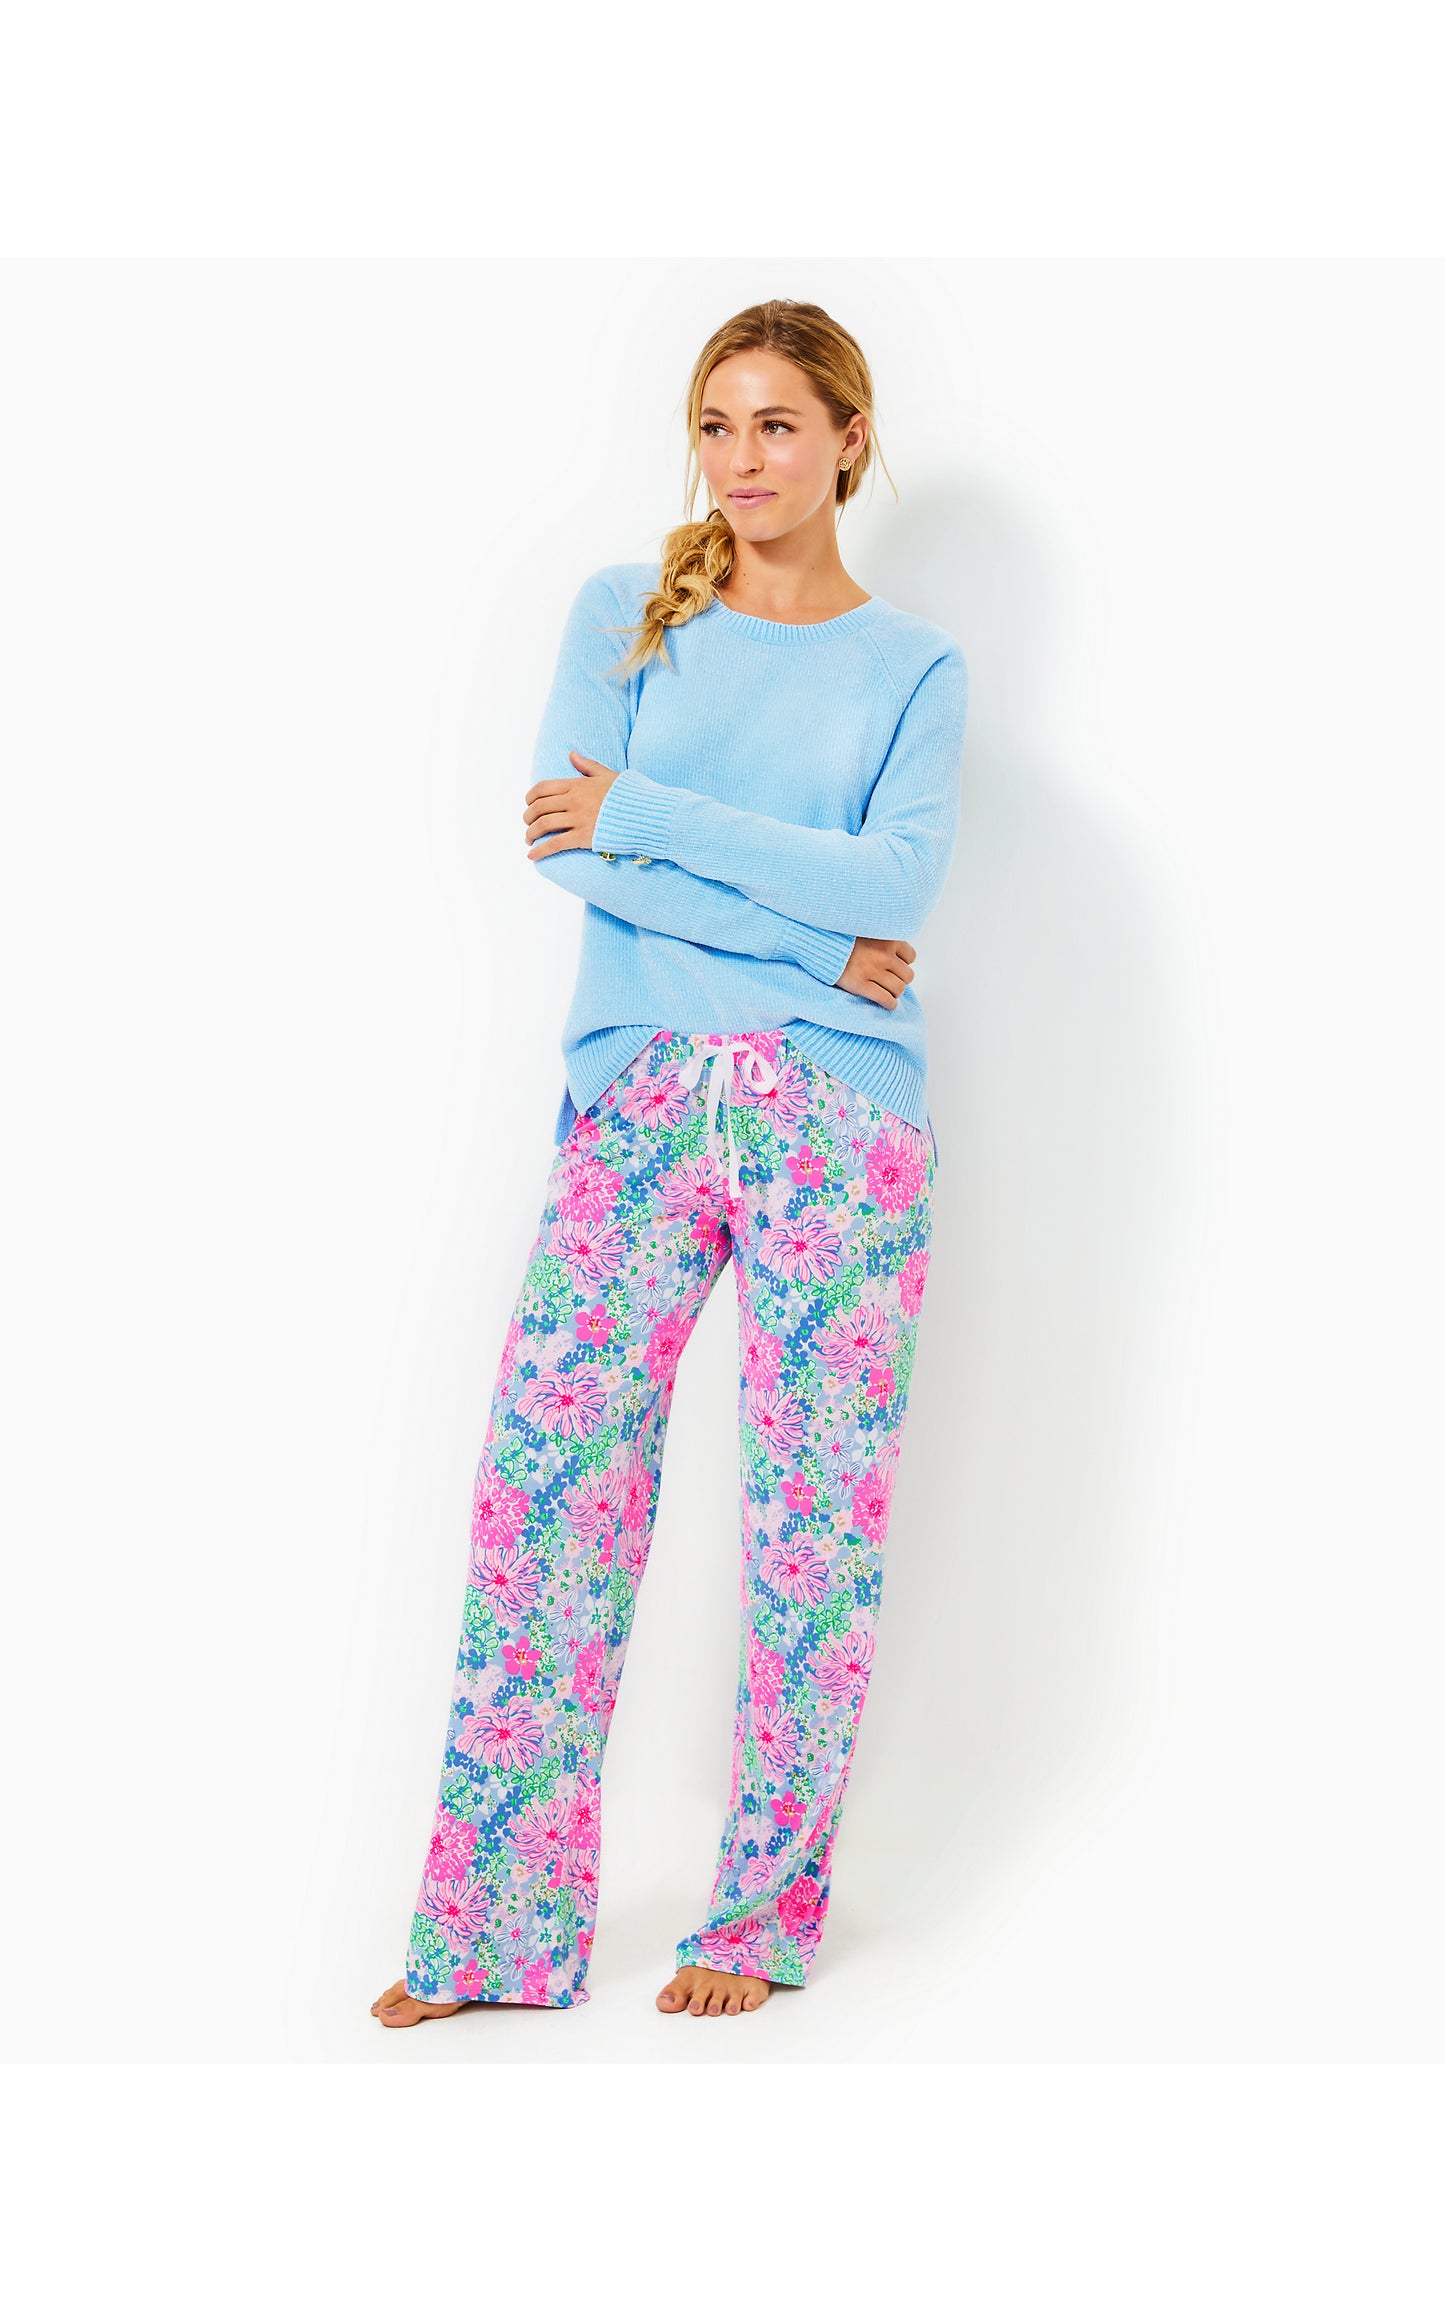 30.5" Pajama Knit Pant in Multi Lil Soiree All Day